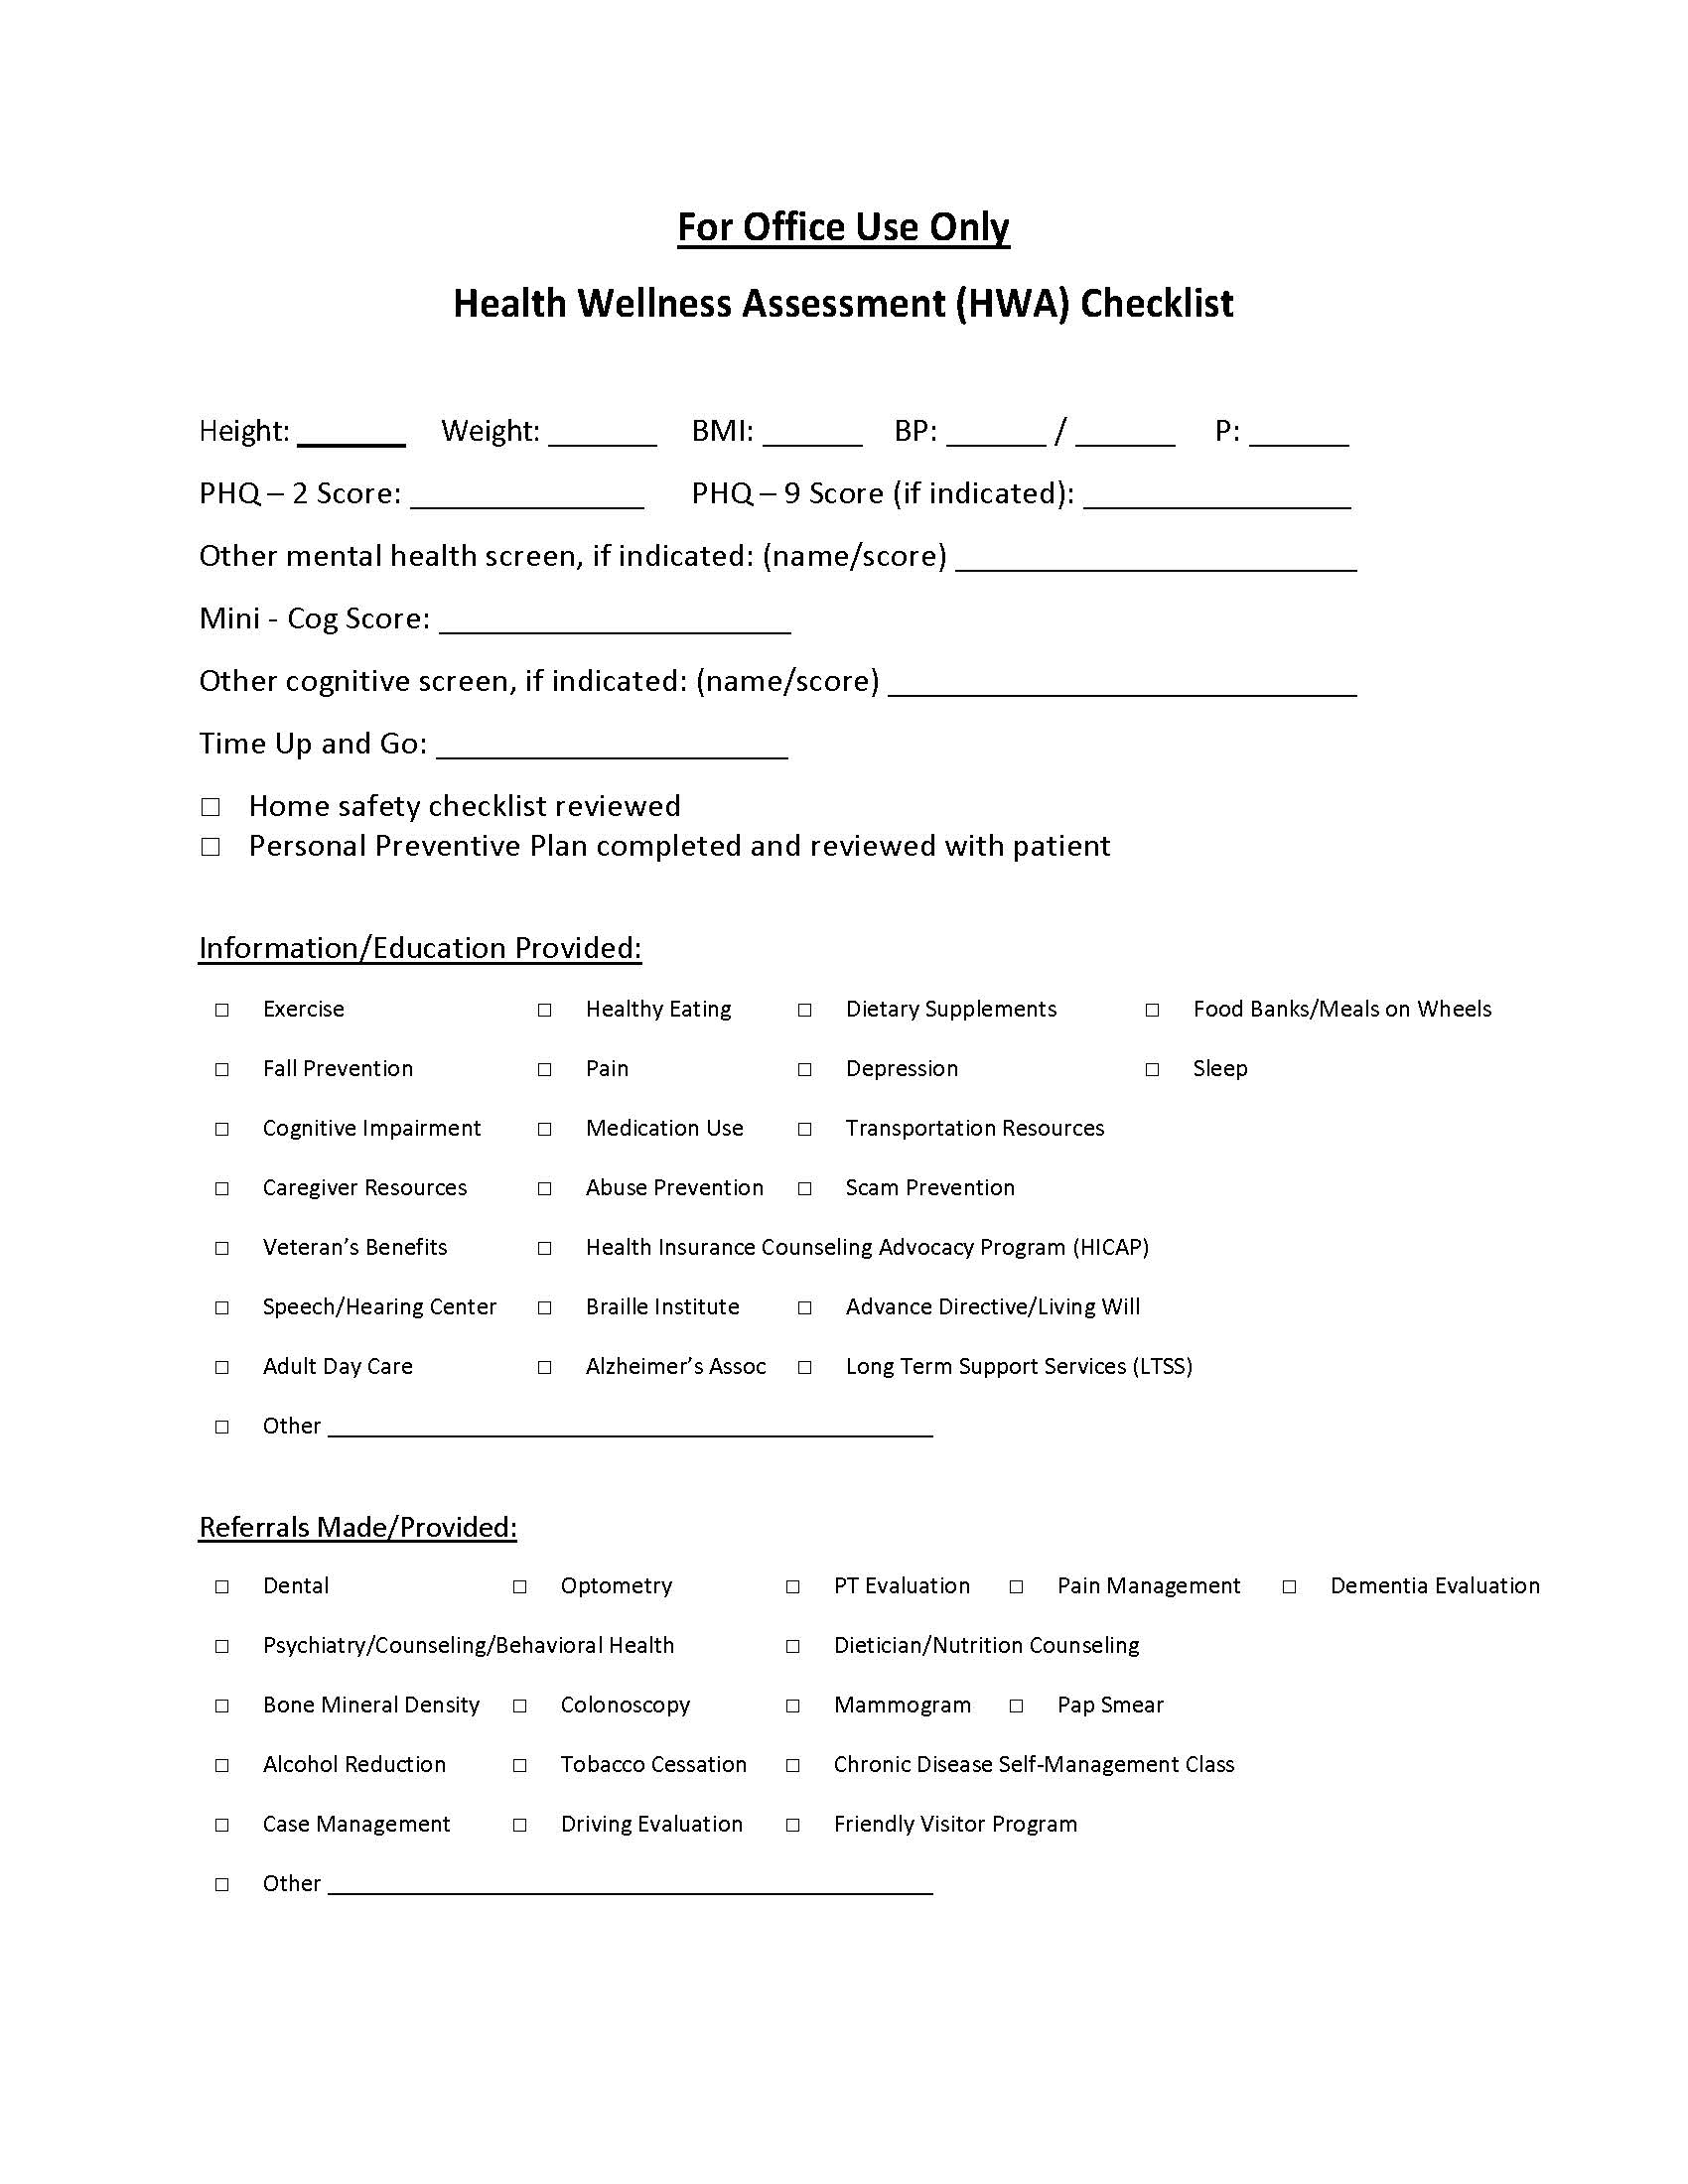 19. b For Office Use Only Health Wellness Assessment HWA